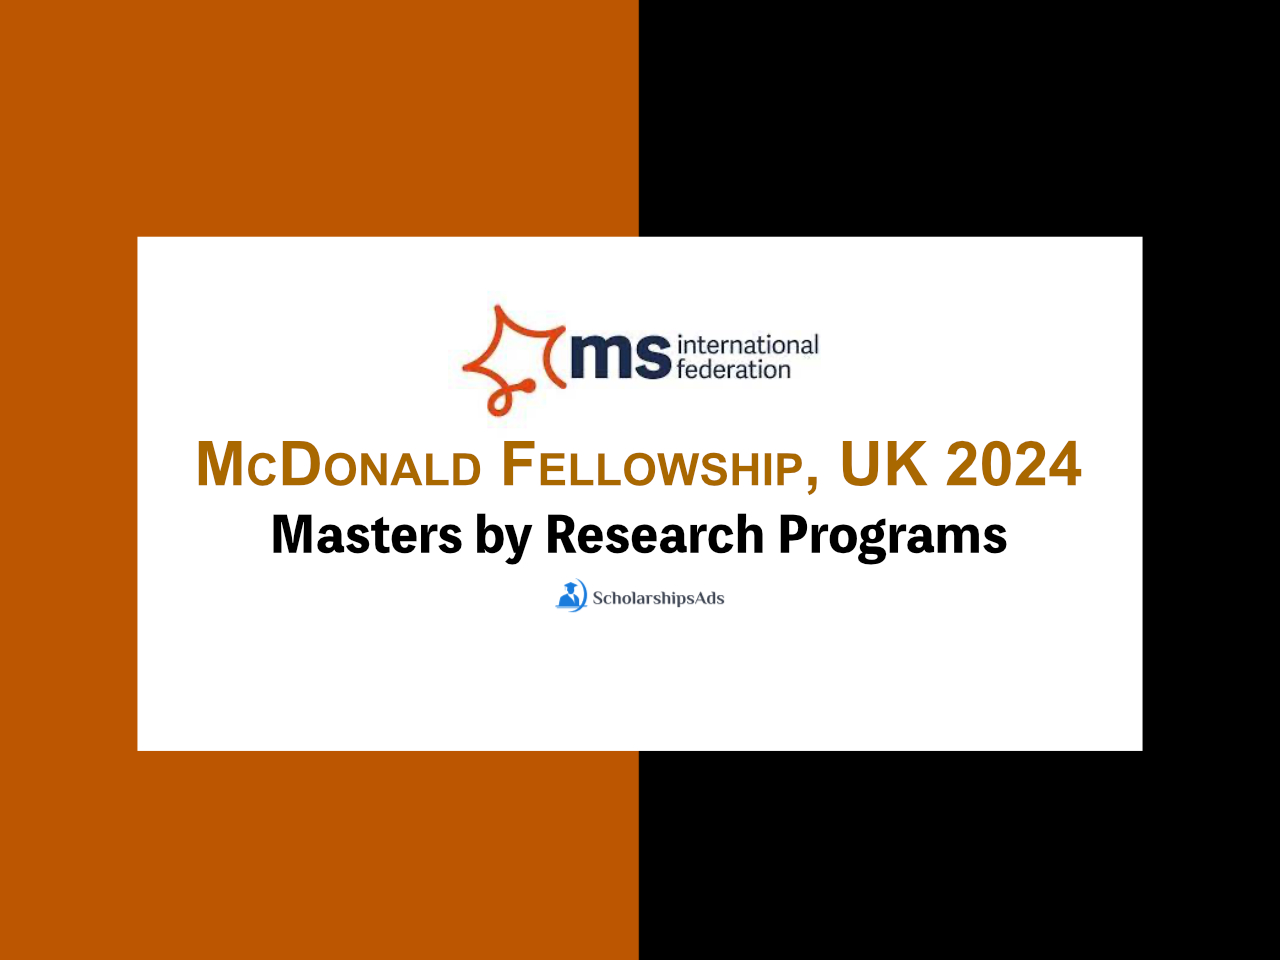 McDonald Fellowships Announces MS Scholarships in UK for Developing Countries Students in 2024